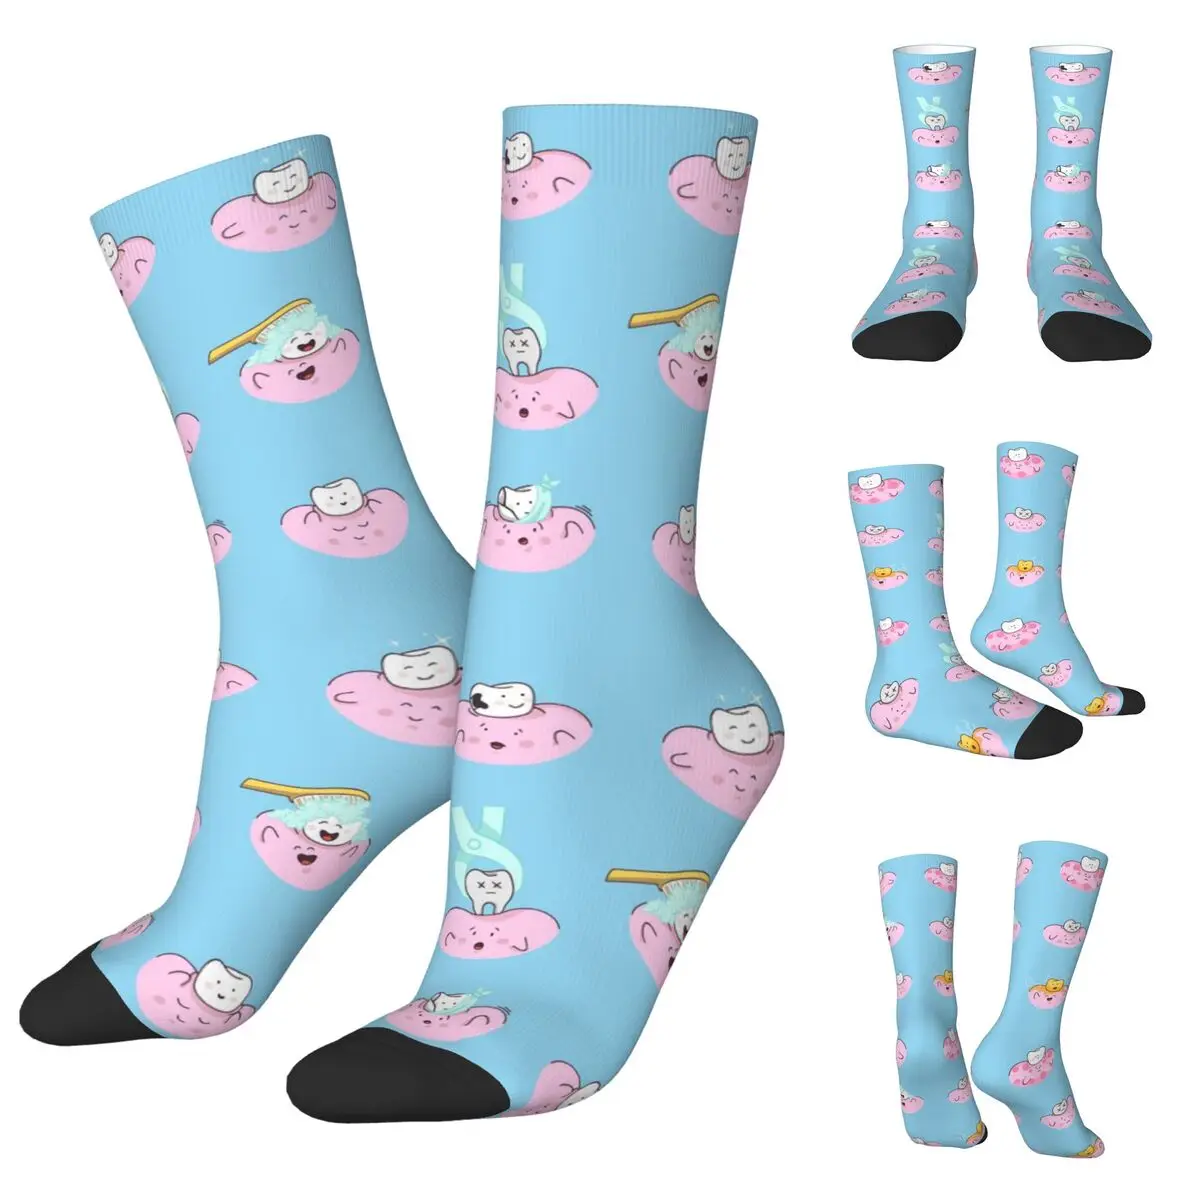 Teeth Baby Men and Women printing Socks,Motion Applicable throughout the year Dressing Gift uniqlo baby socks 2p